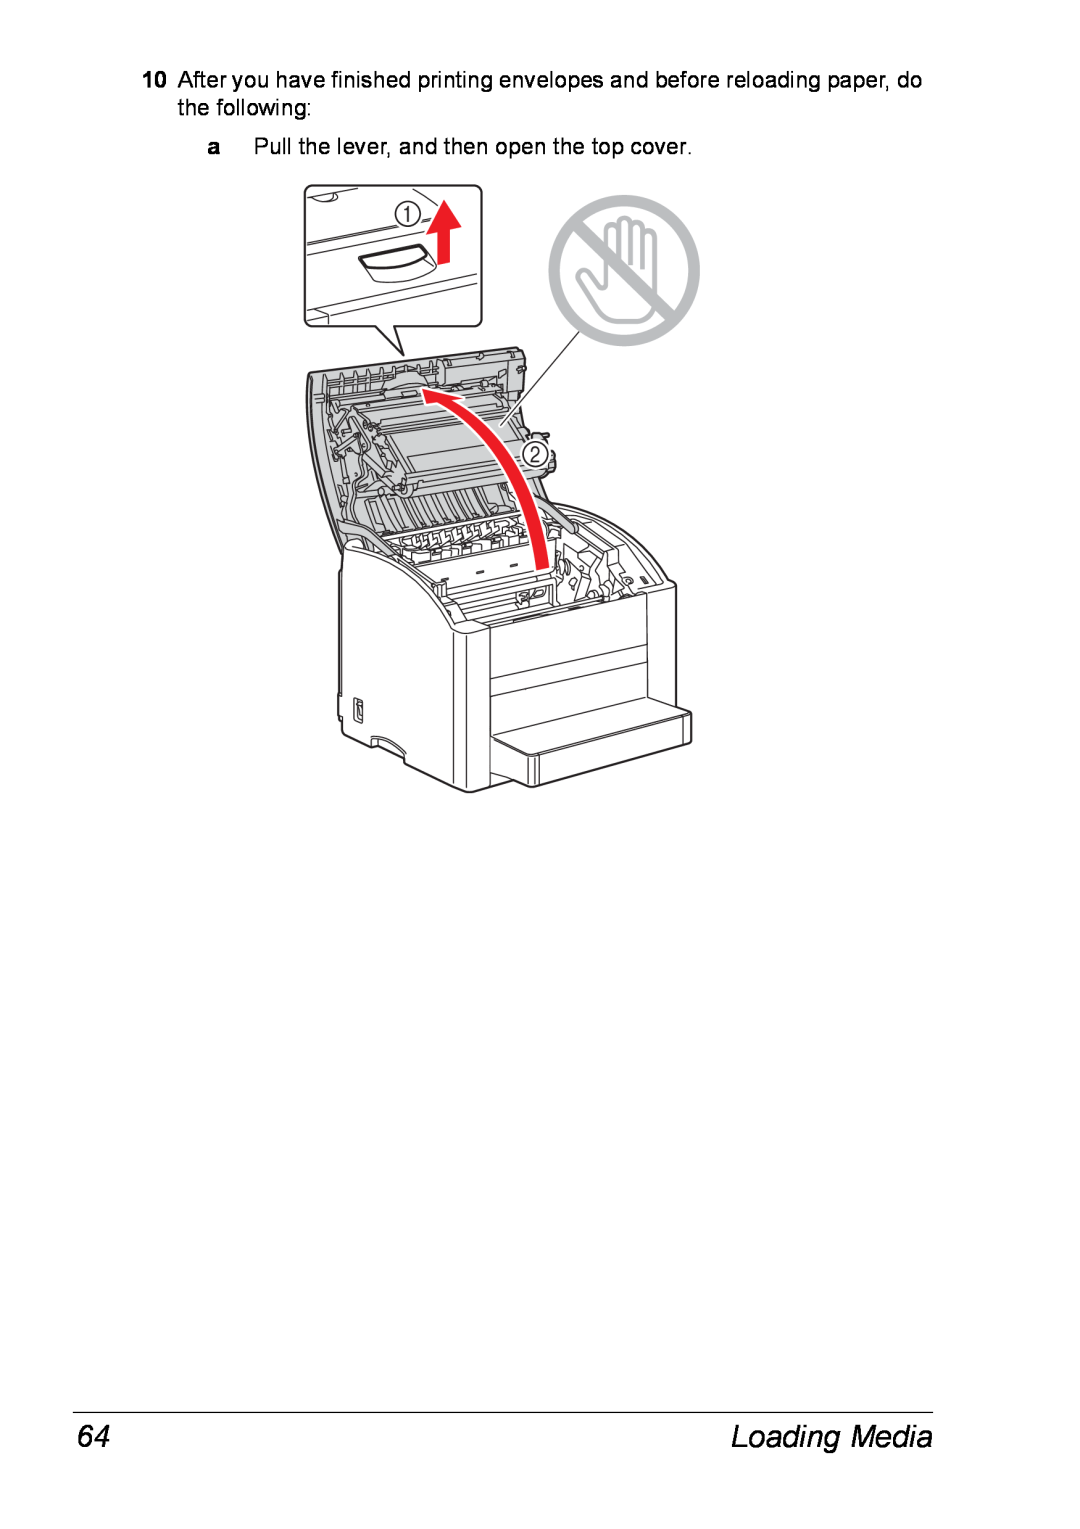 Xerox 6120 manual Loading Media, a Pull the lever, and then open the top cover 